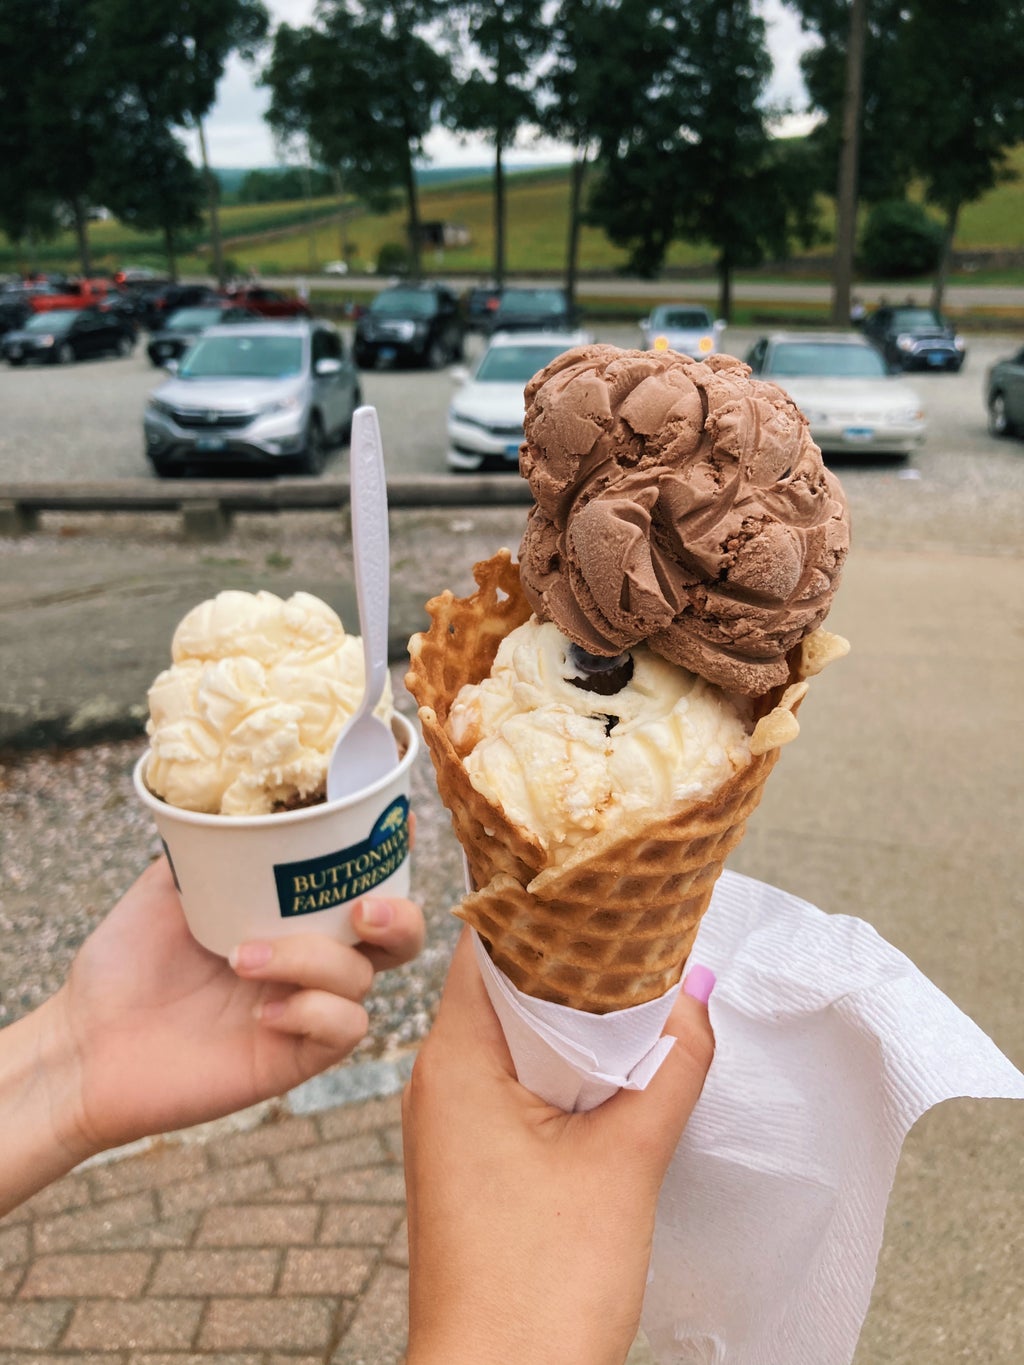 A cup and a waffle cone of ice cream outside in Connecticut.